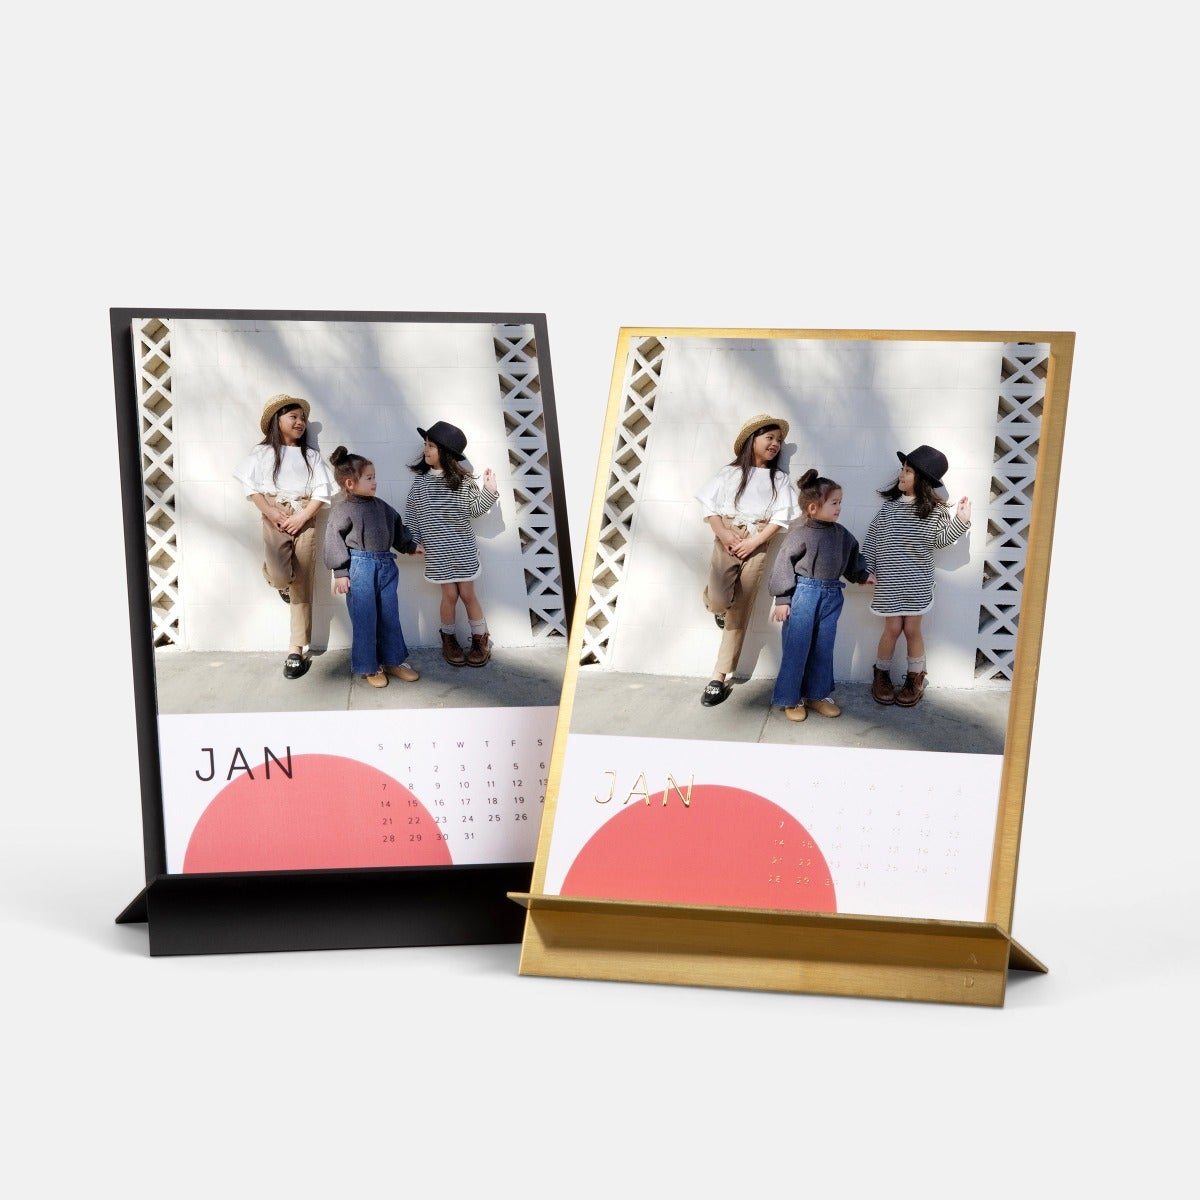 Insta Memories LED Lamp Personalized Birthday: Gift/Send Home and Living  Gifts Online JVS1240712 |IGP.com